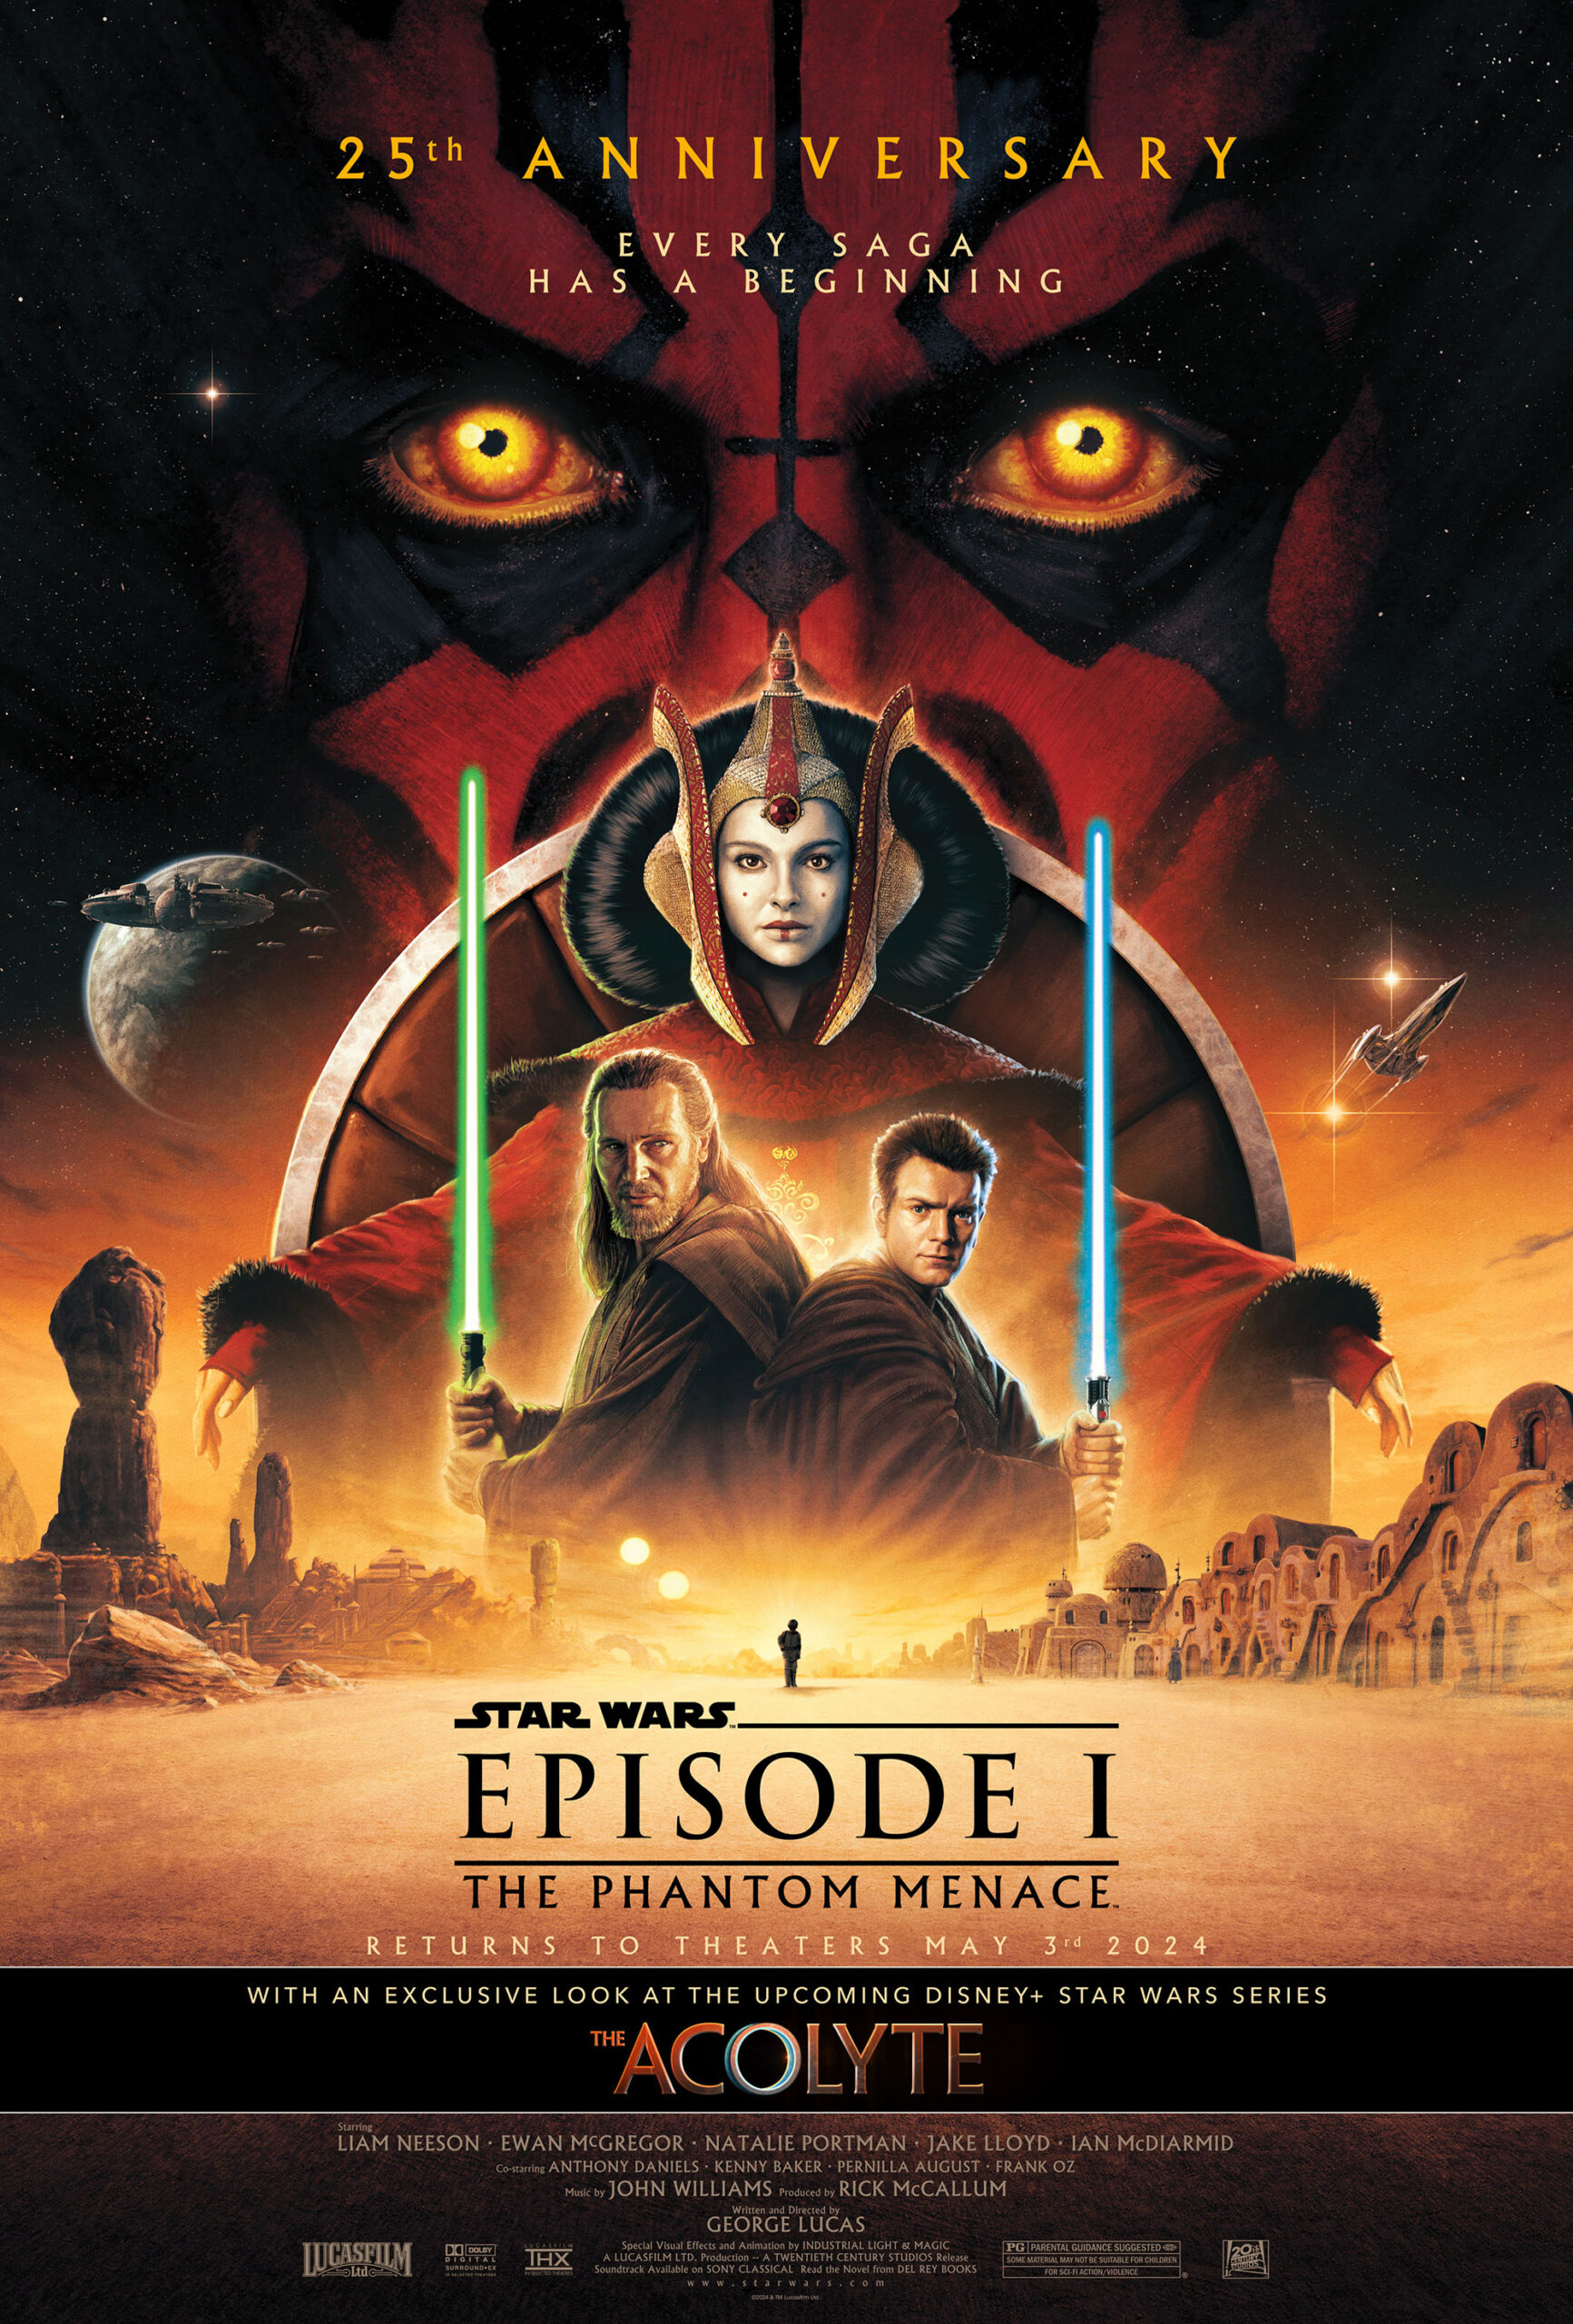 movie poster for the 25th anniversary theatrical re-release of "Star Wars: Episode I — The Phantom Menace." At top are the words "25th Anniversary," below which reads: "Every Saga Has a Beginning." A large, extreme close-up of the face of character Darth Maul fills the backdrop, below which are illustrations of the characters Padme Amadala, Qui-Gon Jinn and Obi-Wan Kenobi.